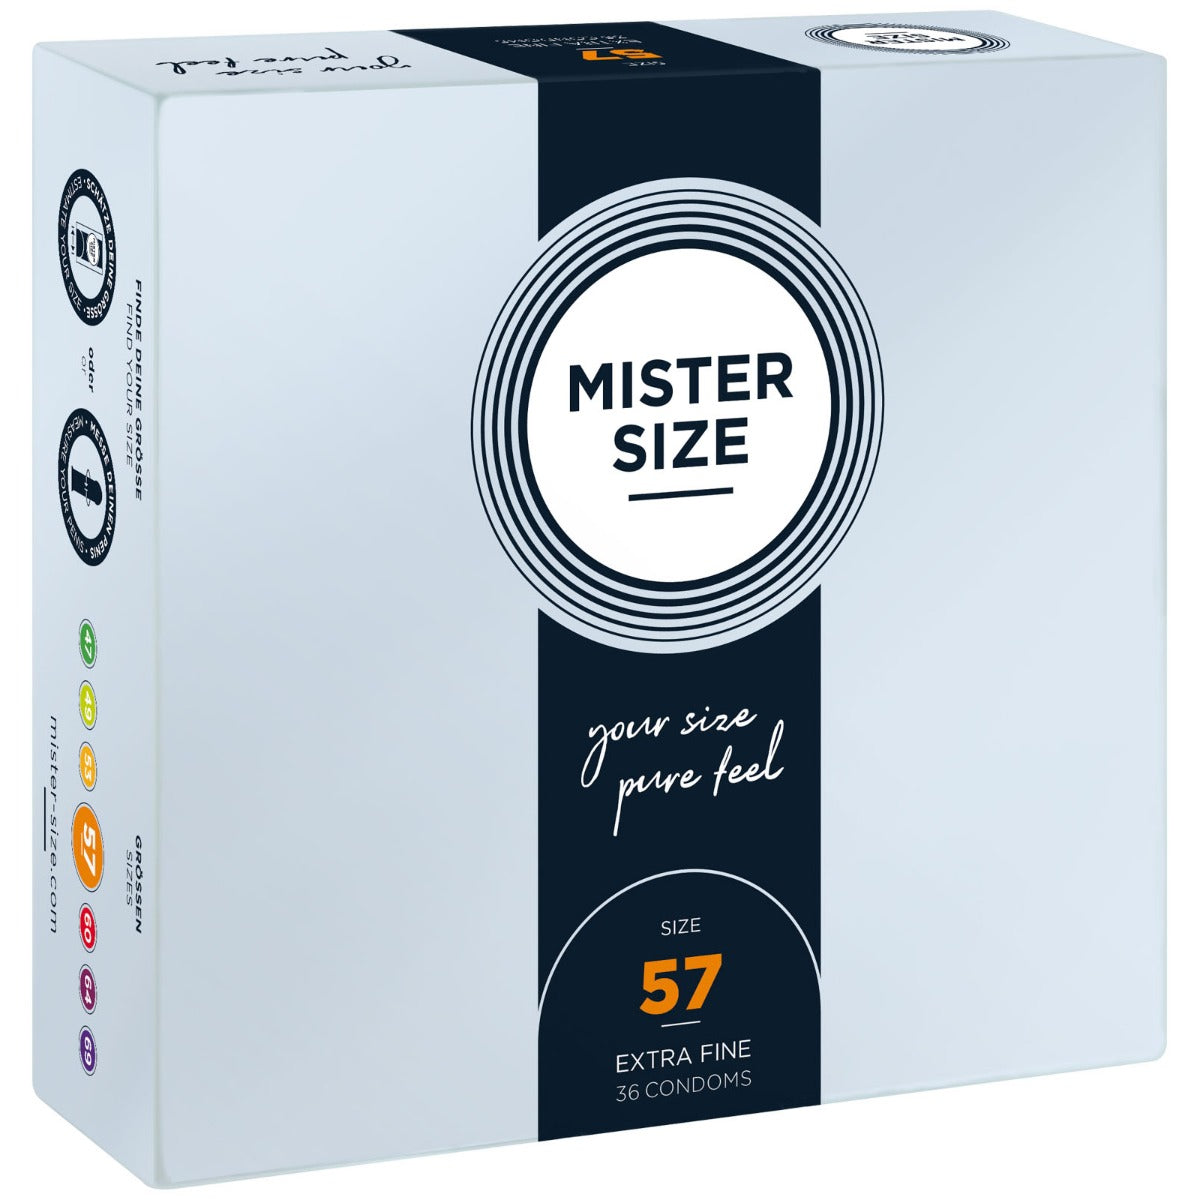 Condoms MISTER SIZE - pure feel Condoms - Size 57 mm (36 pack)   